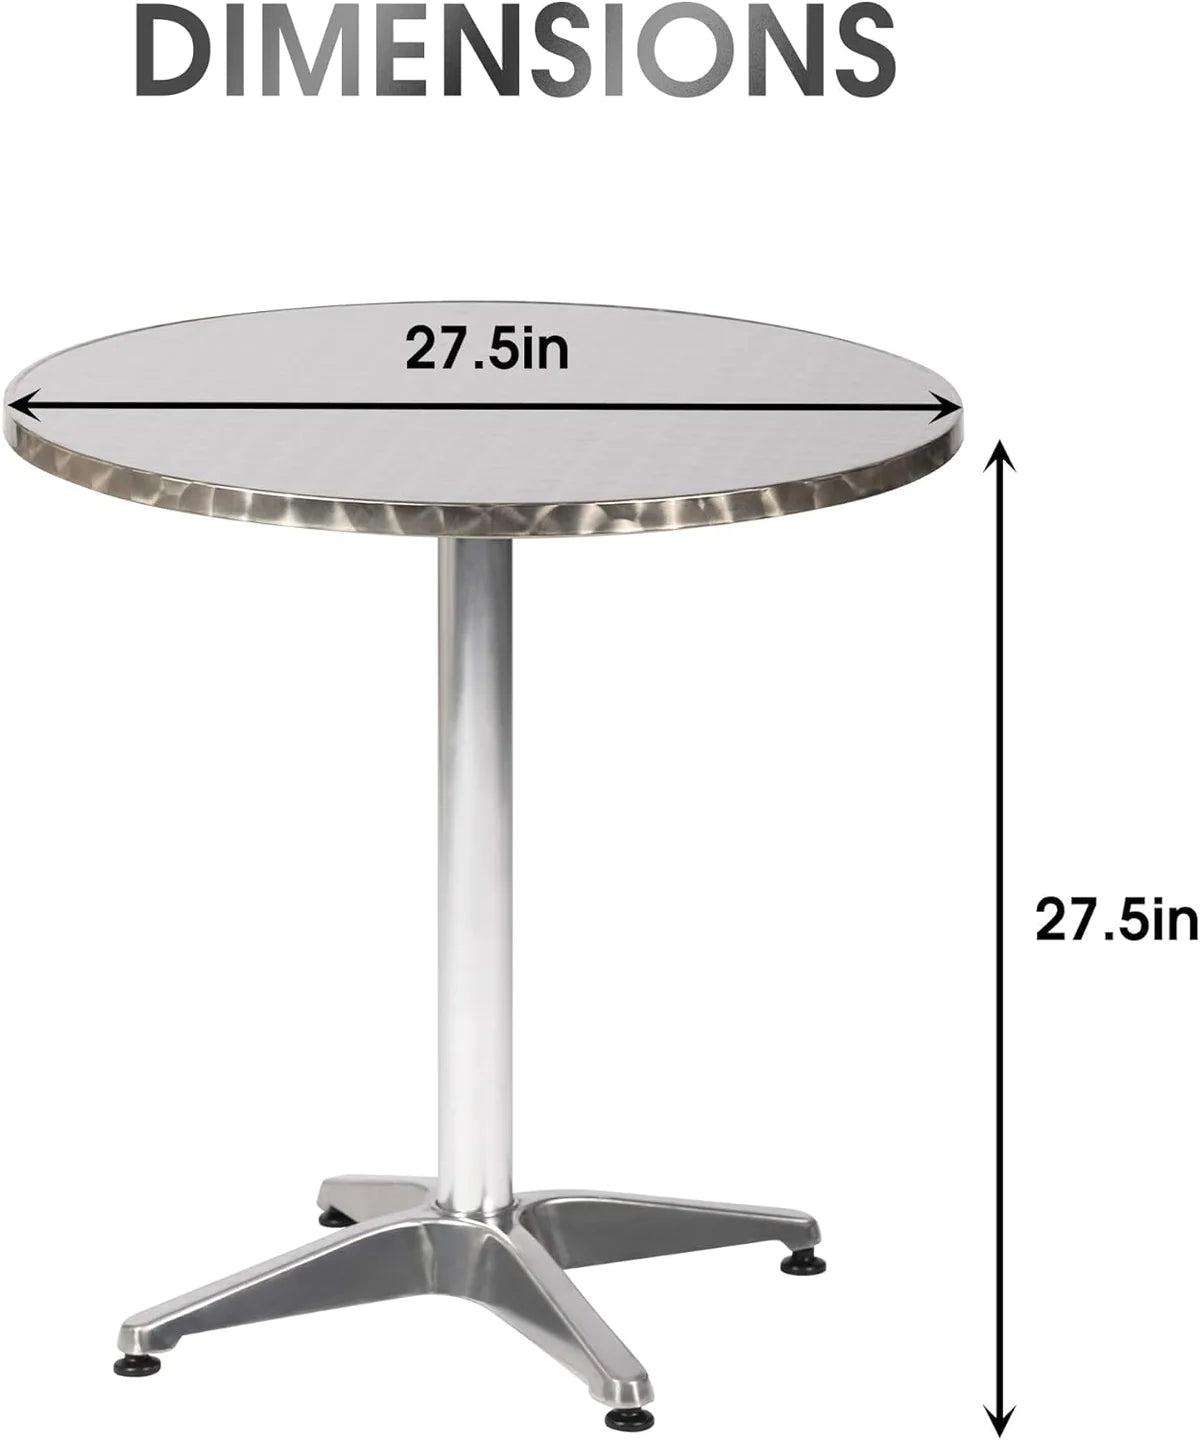 Outdoor courtyard recreation metal round table, X-shaped Base, Multiple dimensions